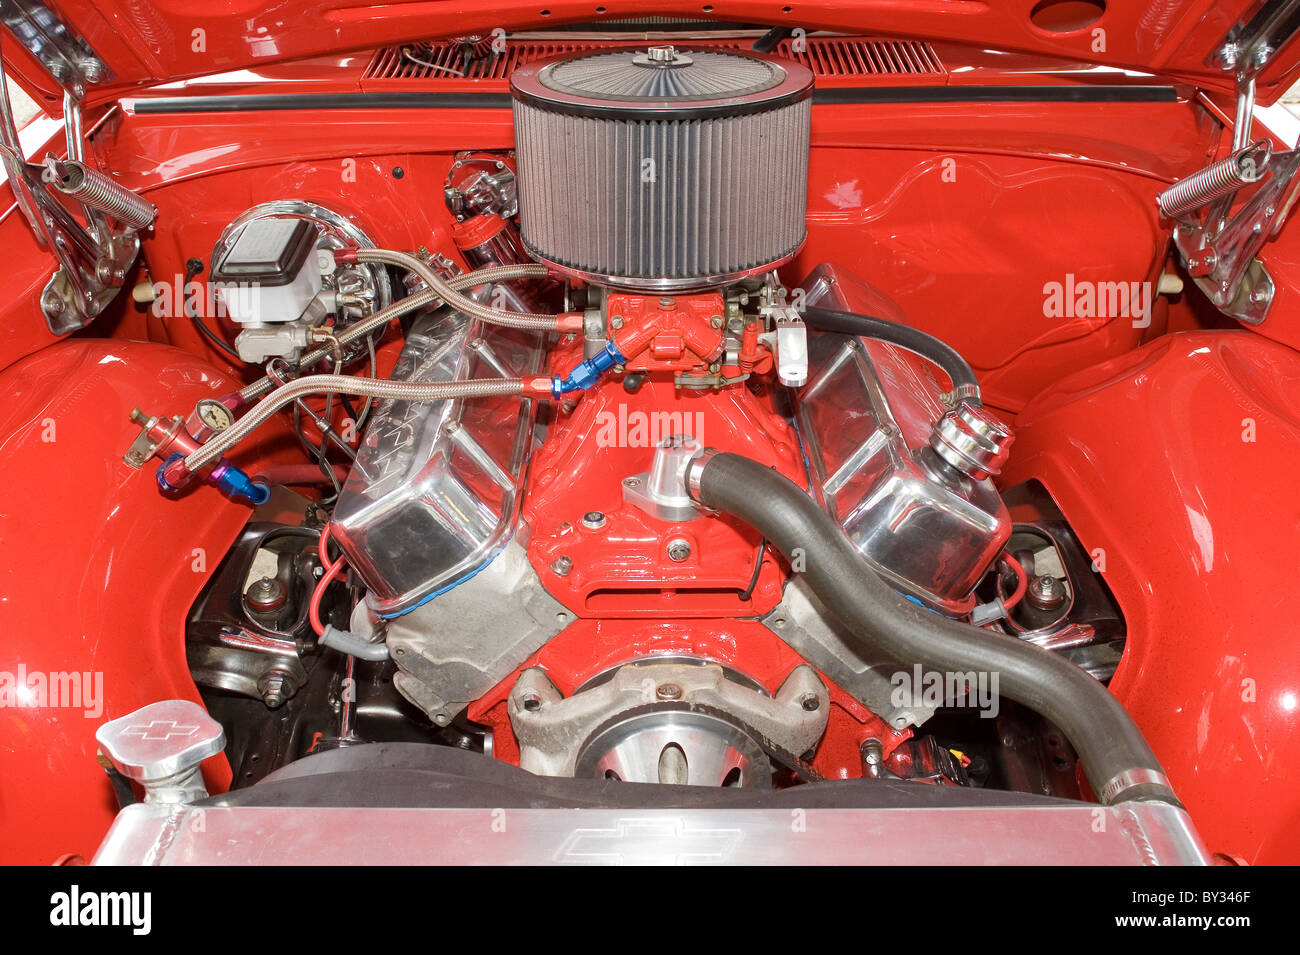 Large V8 engine in a modified American muscle style car Stock Photo